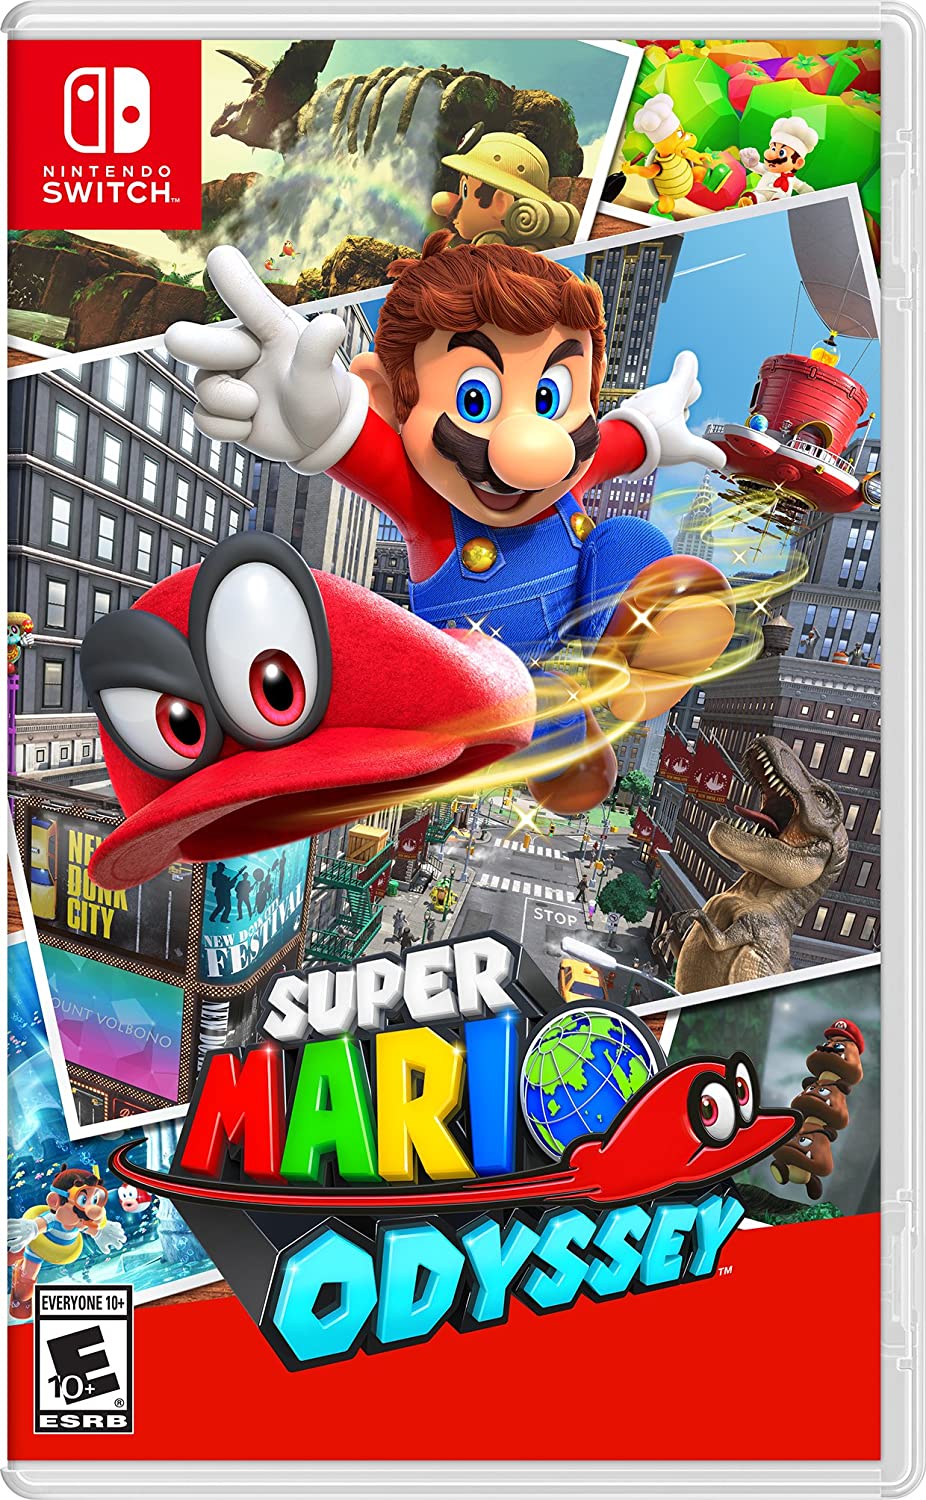 Super Mario: Odyssey for the Nintendo Switch.